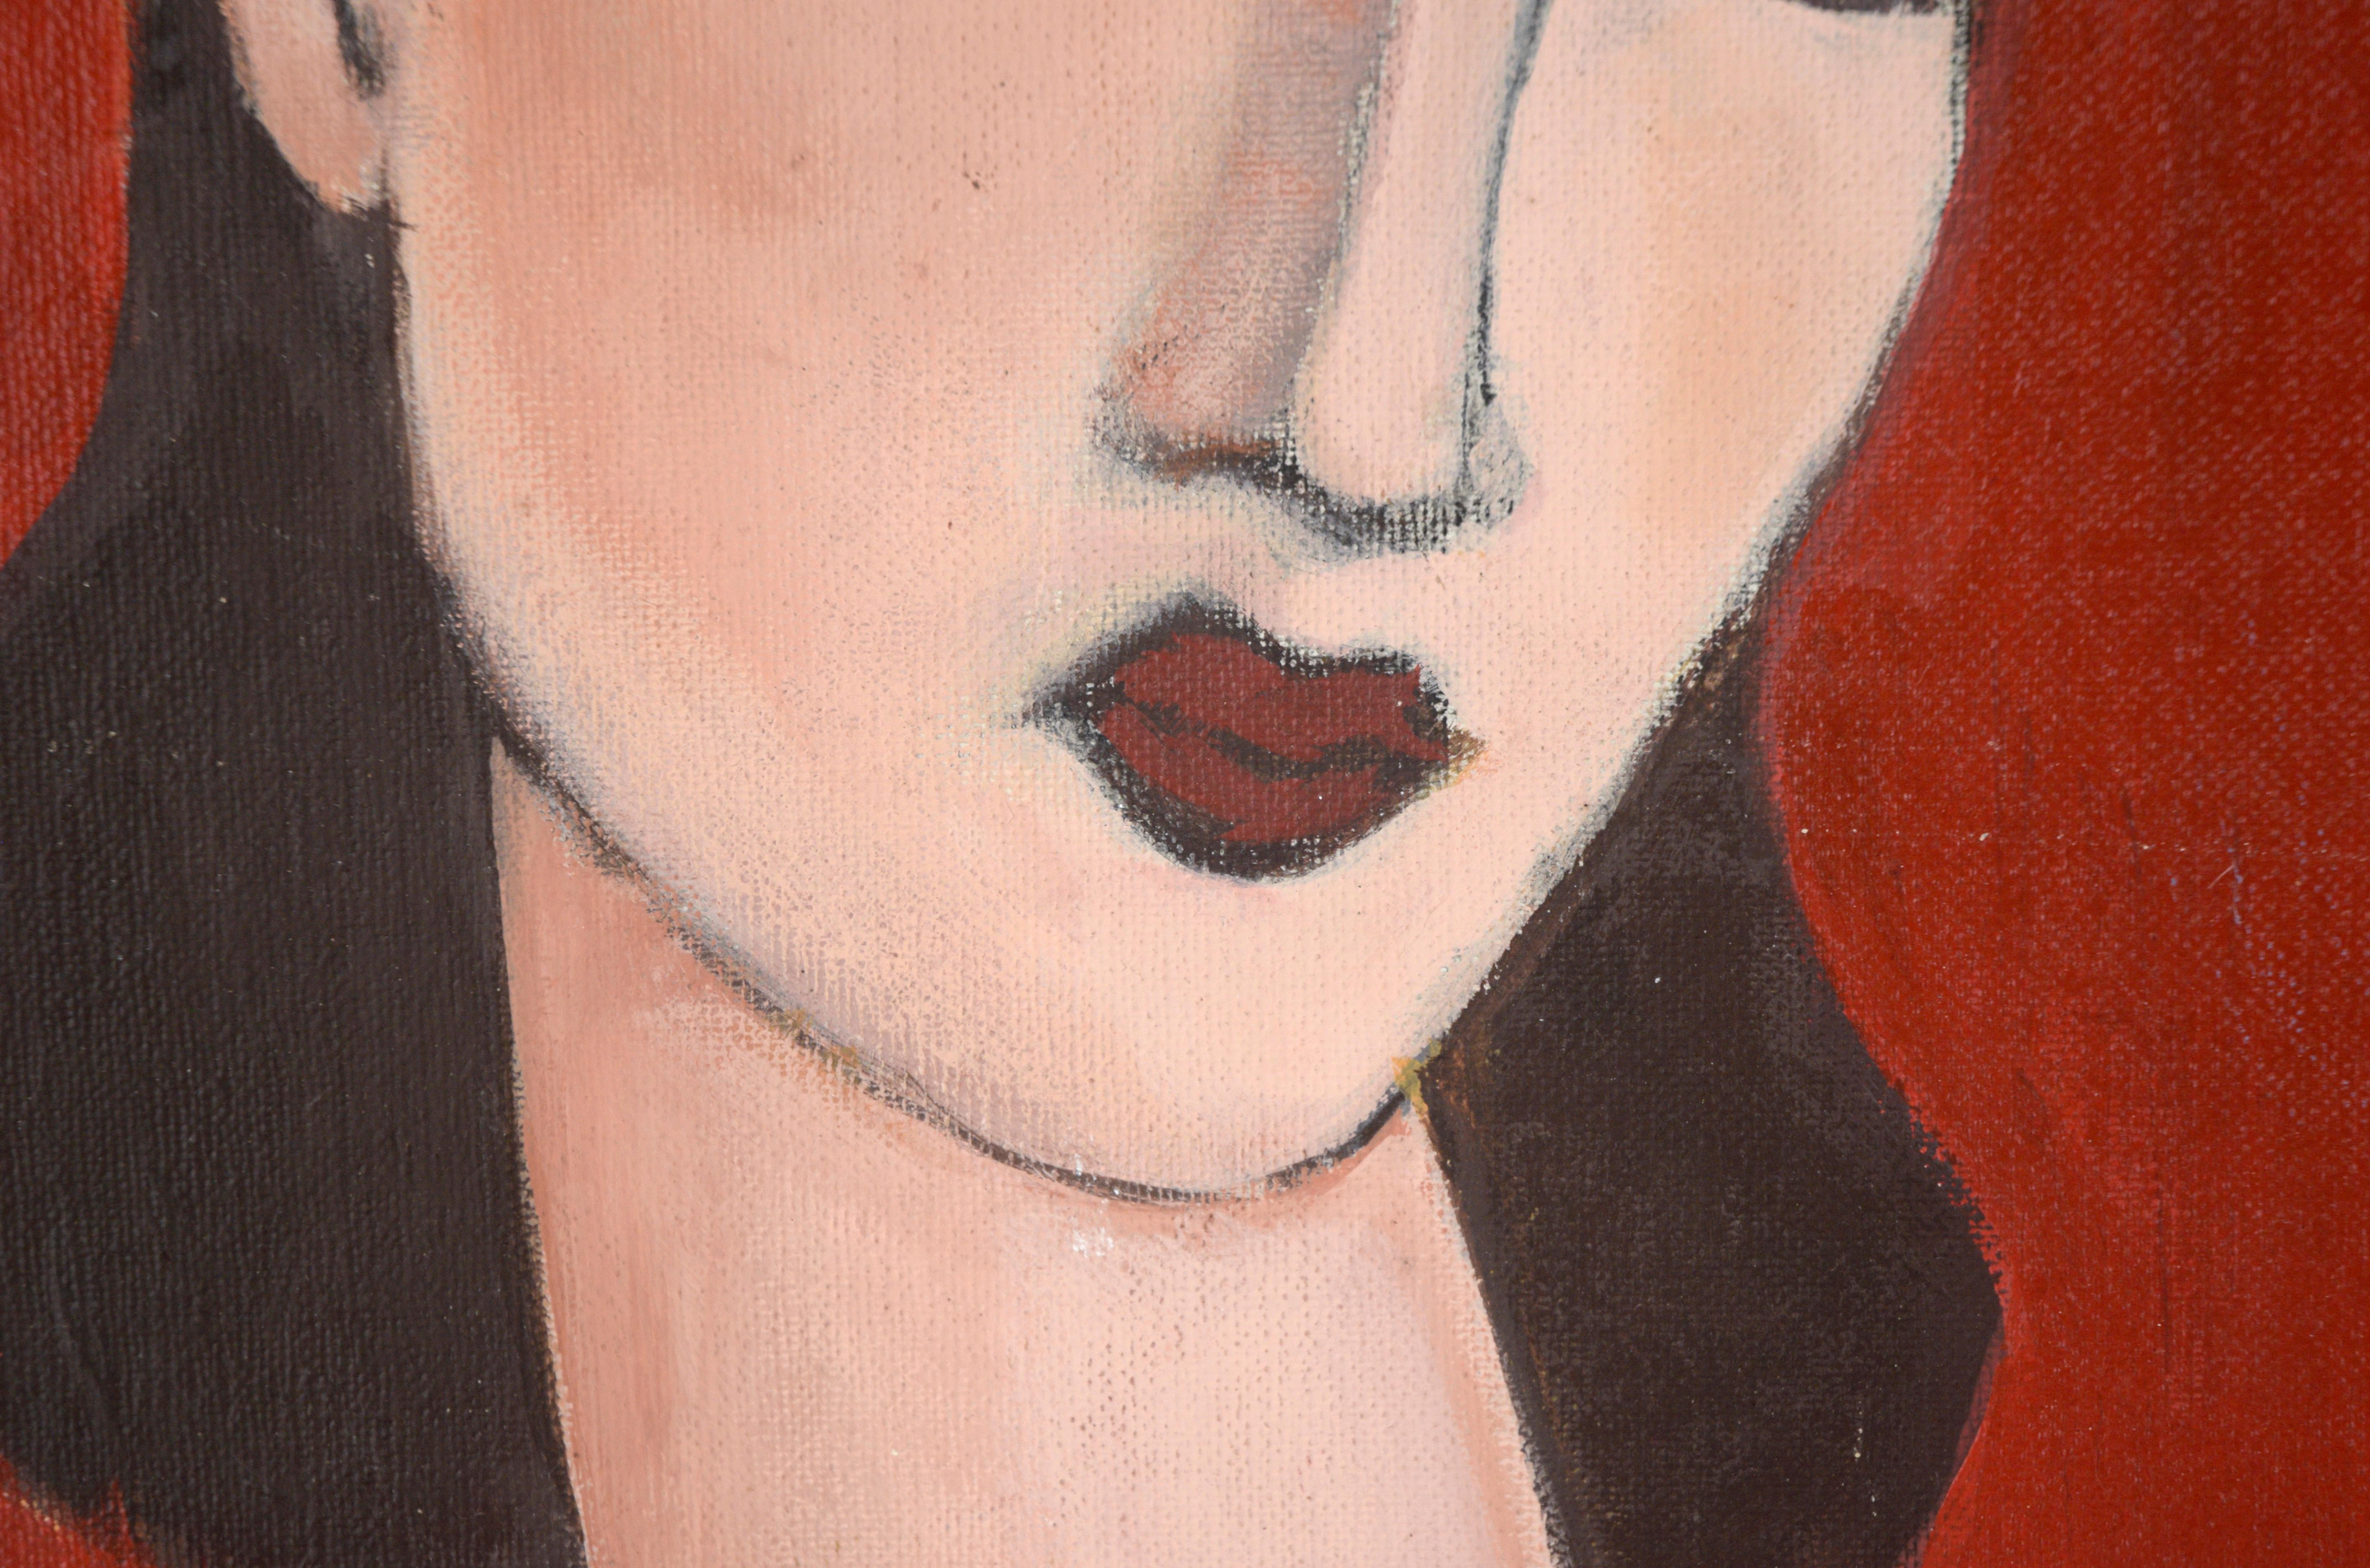 Portrait of a Woman with Brown Hair on a Red Background in Acrylic on Artist's Board

Portrait of a woman in the style of Amedeo Modigliani by an unknown artist (20th century). The woman has dark brown hair, parted in the center, and pursed, bright